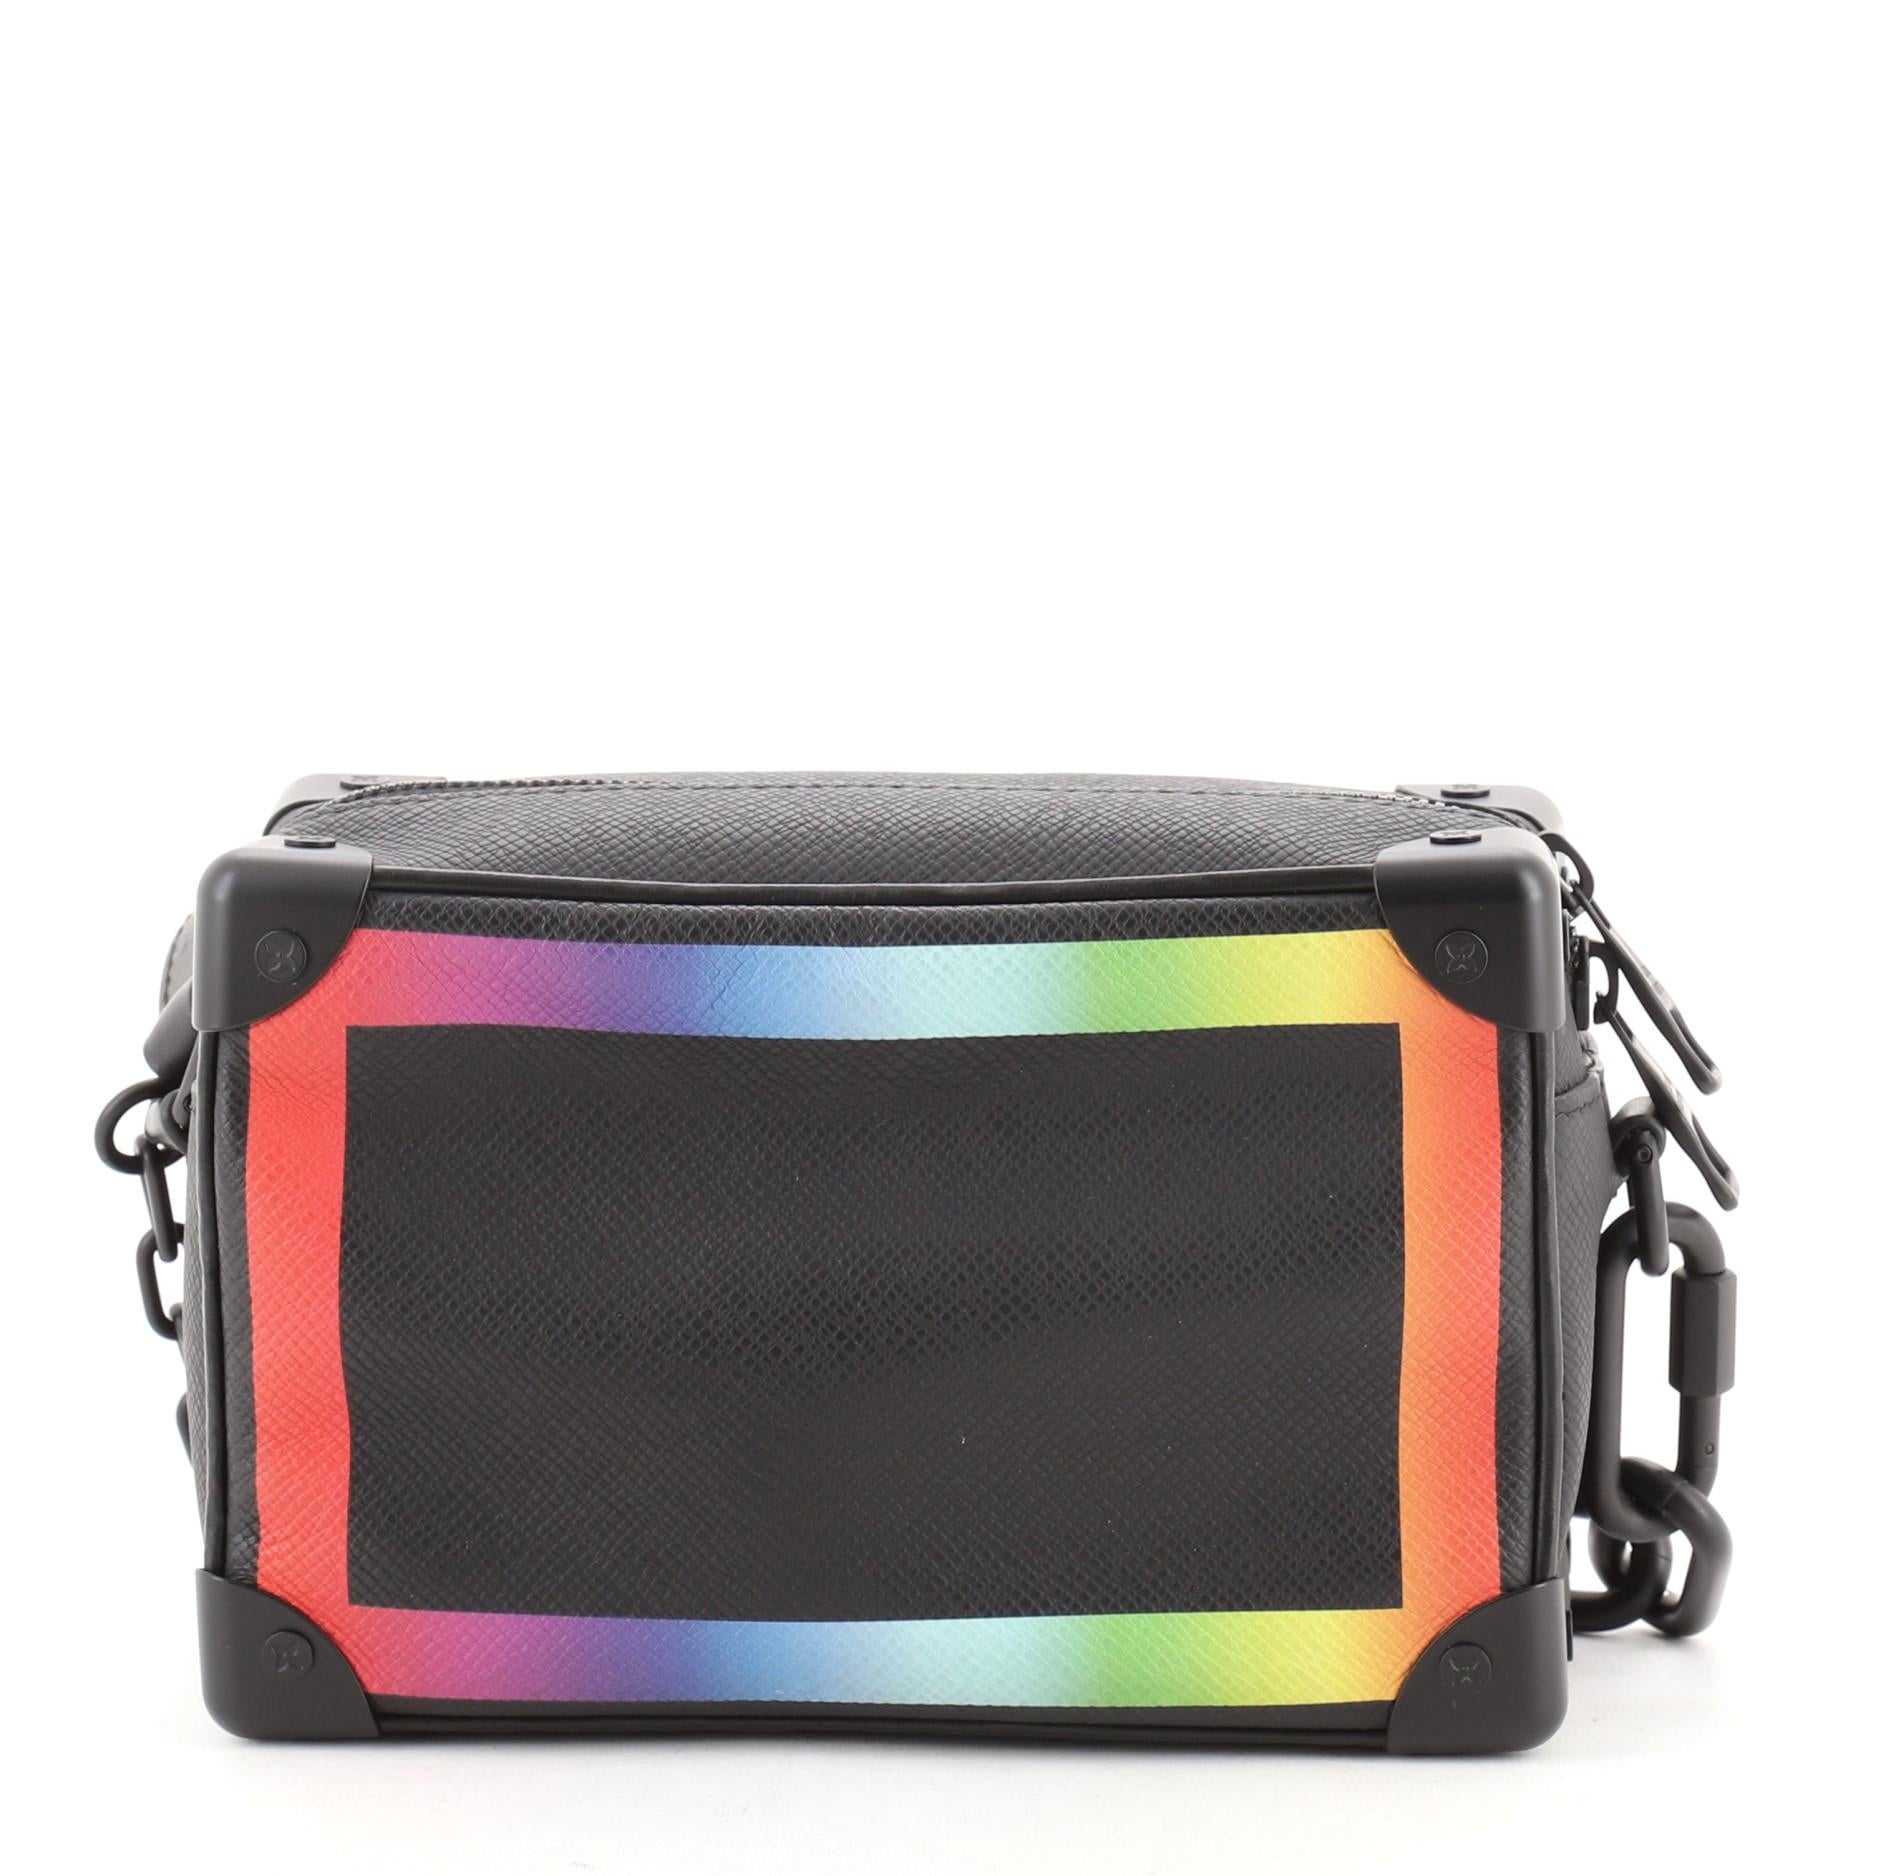 Louis Vuitton Soft Trunk Bag Rainbow Taiga Leather Mini
Black Rainbow Taiga Leather

Condition Details: Creasing on exterior, small indentations on strap, scratches on hardware.

44860MSC

Height 5